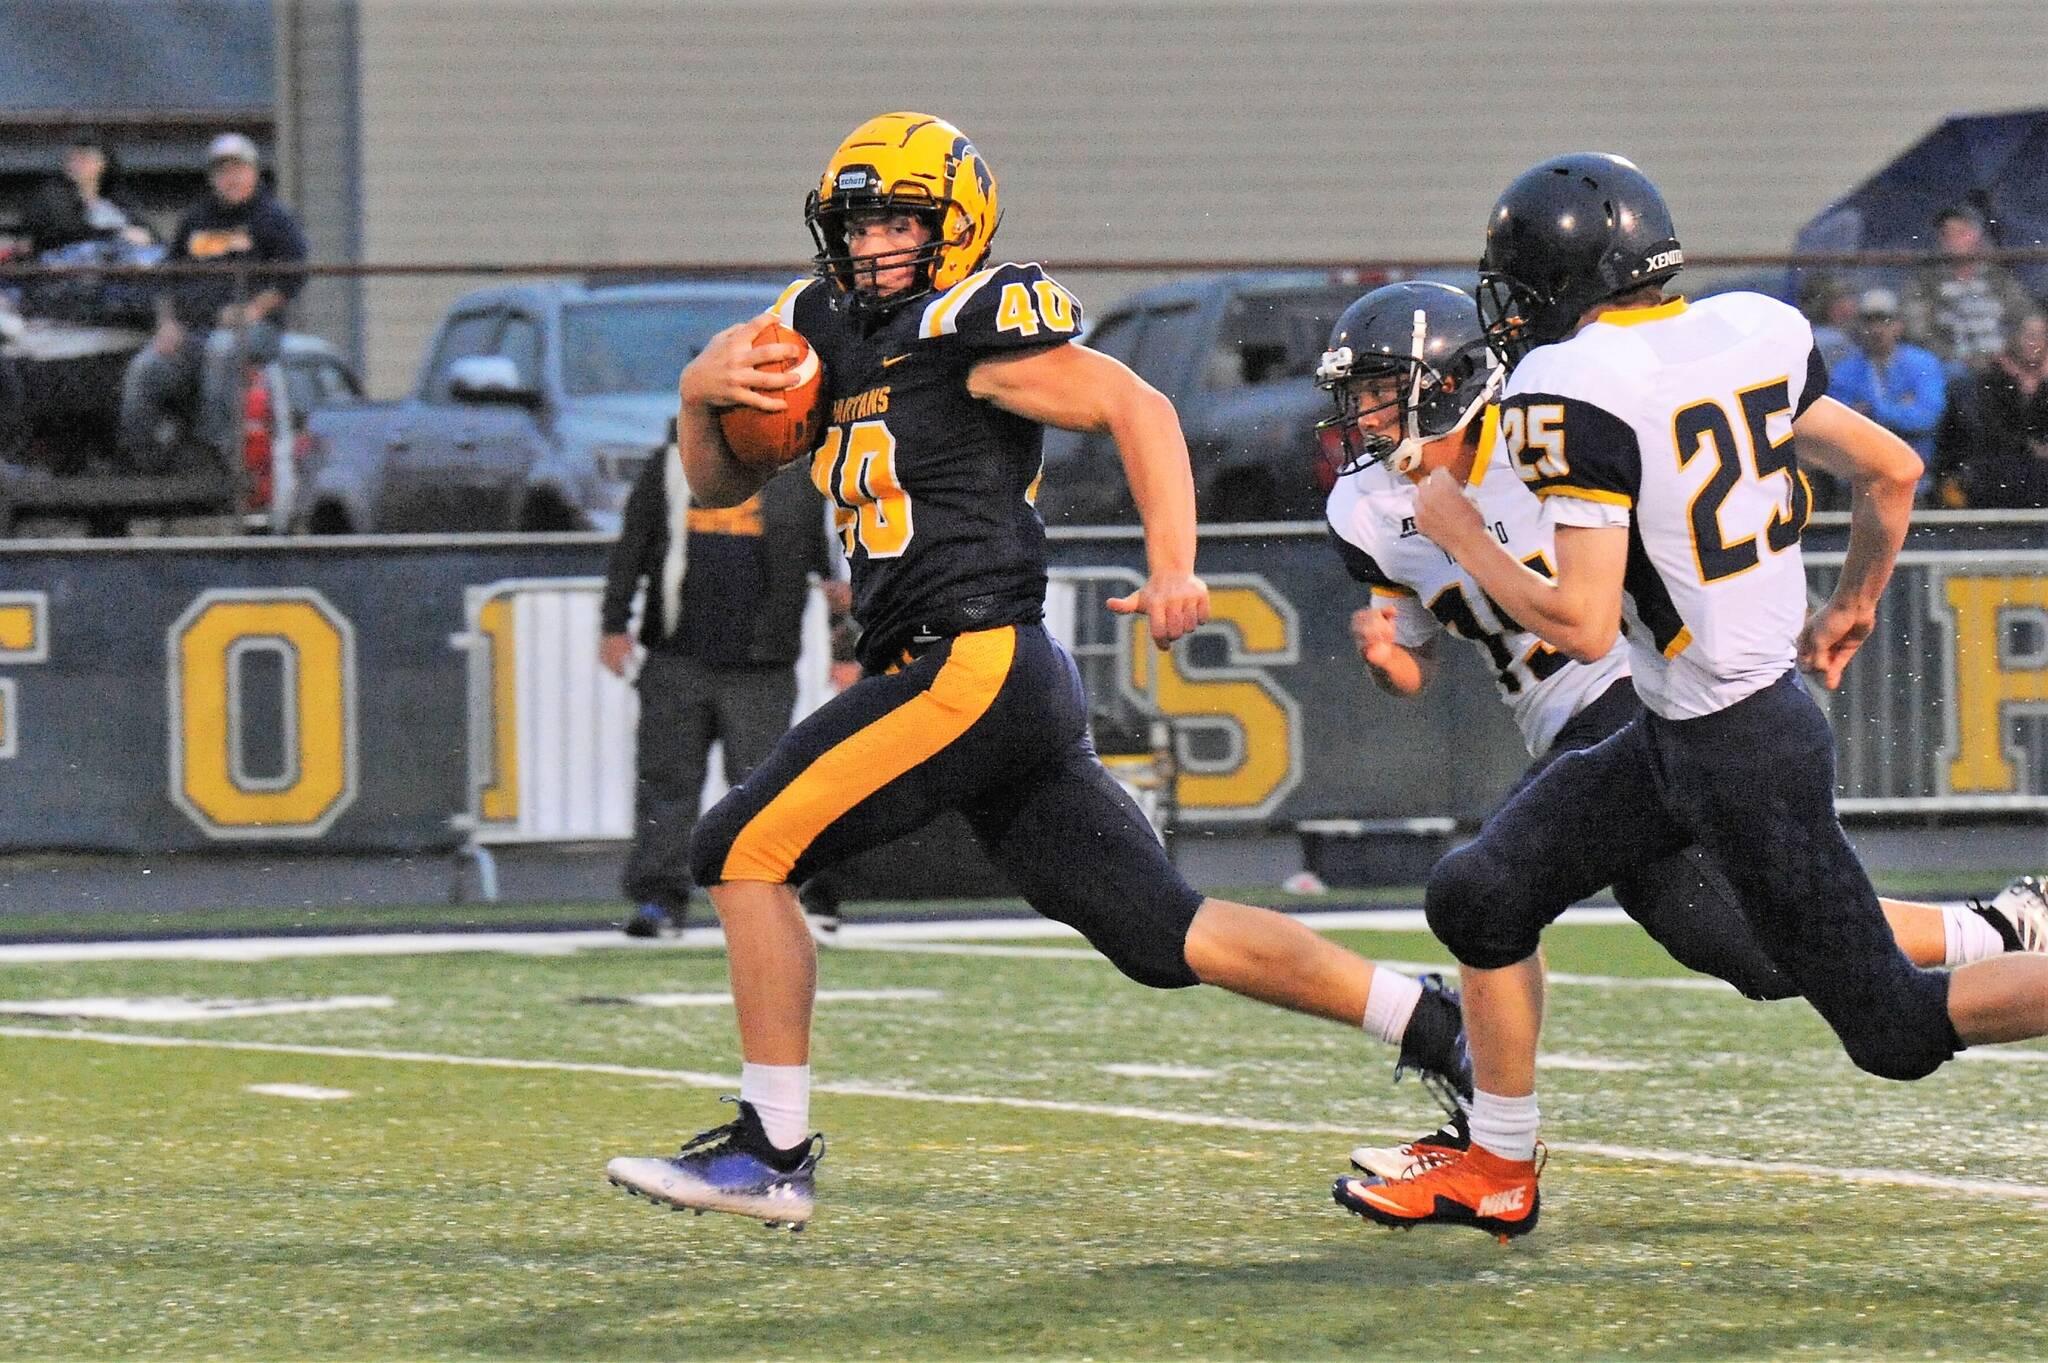 Spartan Nate Dahlgren checks on the last Ilwaco defender en route to a touchdown early in the first quarter against the Fisherman. Photo by Lonnie Archibald